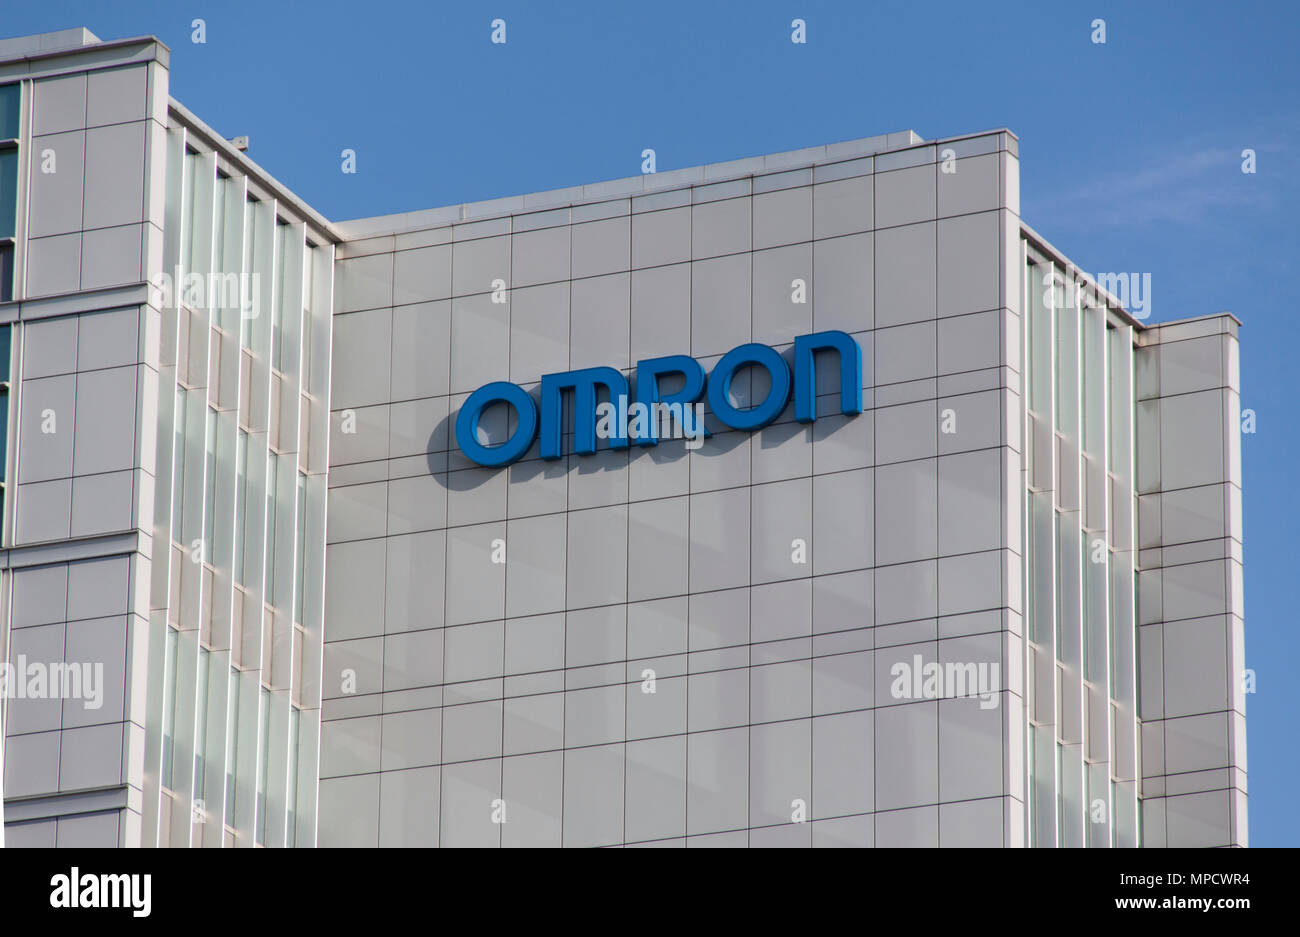 https://c8.alamy.com/comp/MPCWR4/amsterdam-netherlands-october-11-2015-omron-is-a-company-in-the-industrial-automation-and-has-designed-complete-production-lines-and-components-the-MPCWR4.jpg